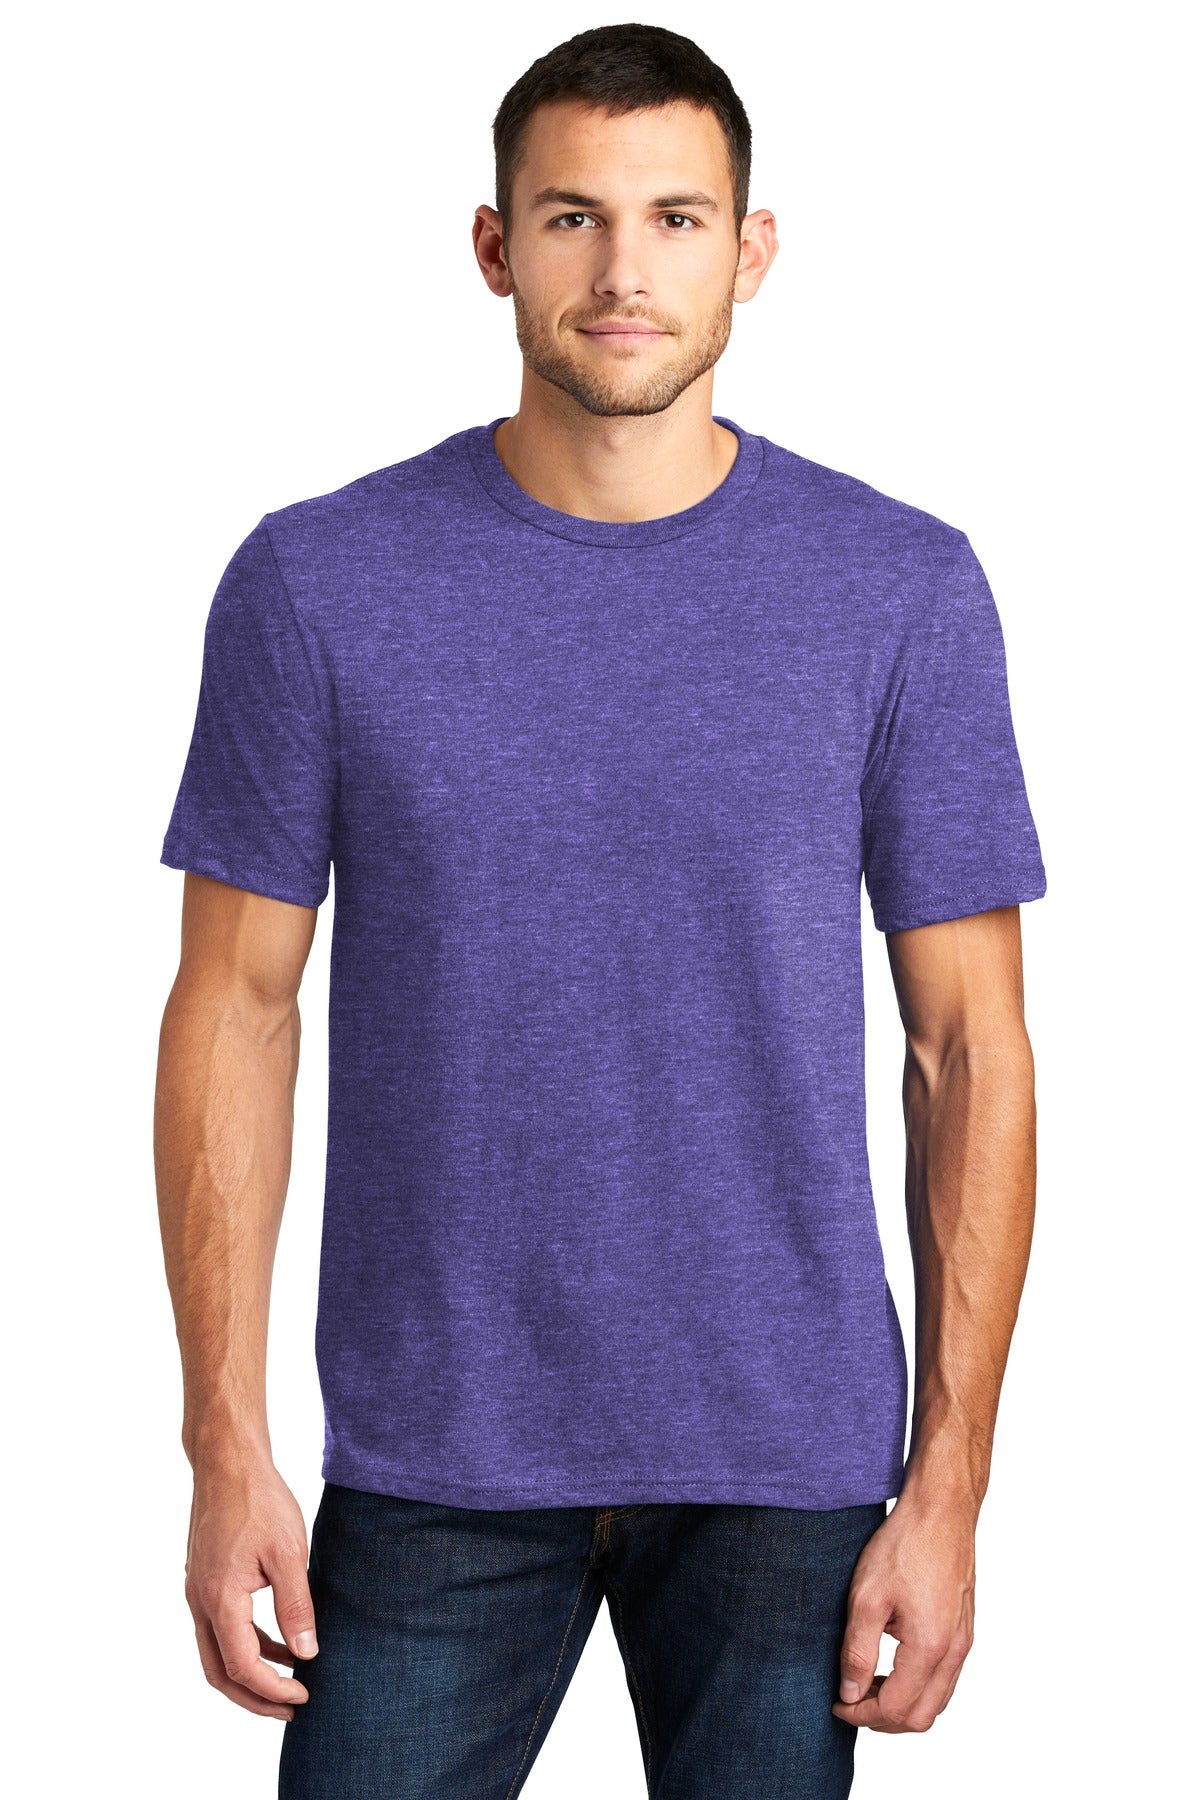 District® Very Important Tee®. DT6000 [Heathered Purple] - DFW Impression